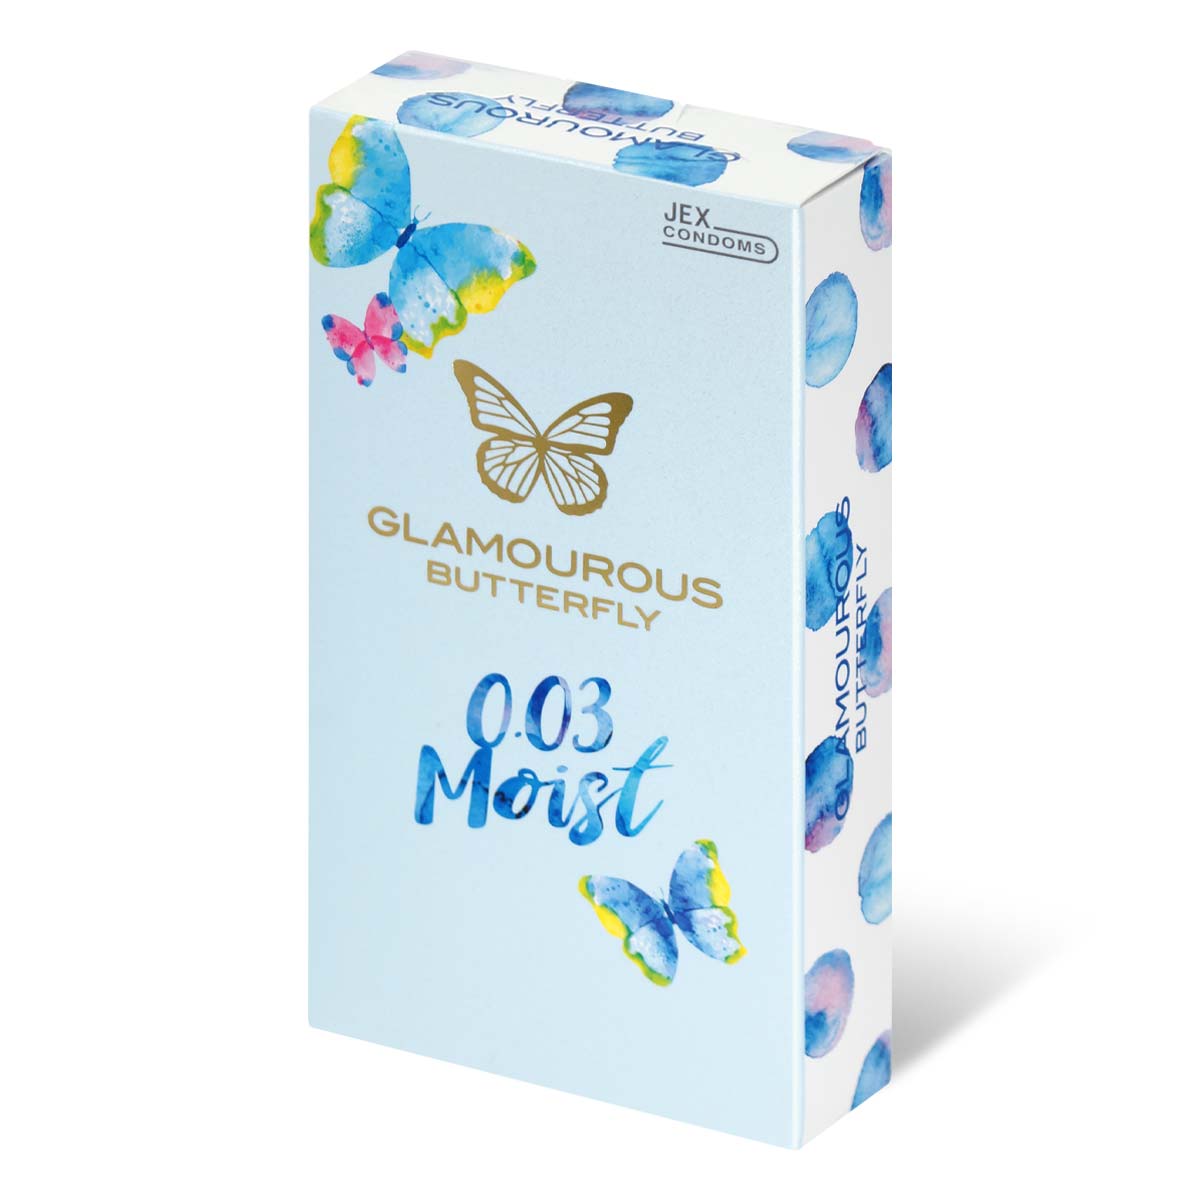 Glamourous Butterfly 0.03 Moist Type 10's Pack Latex Condom-thumb_1